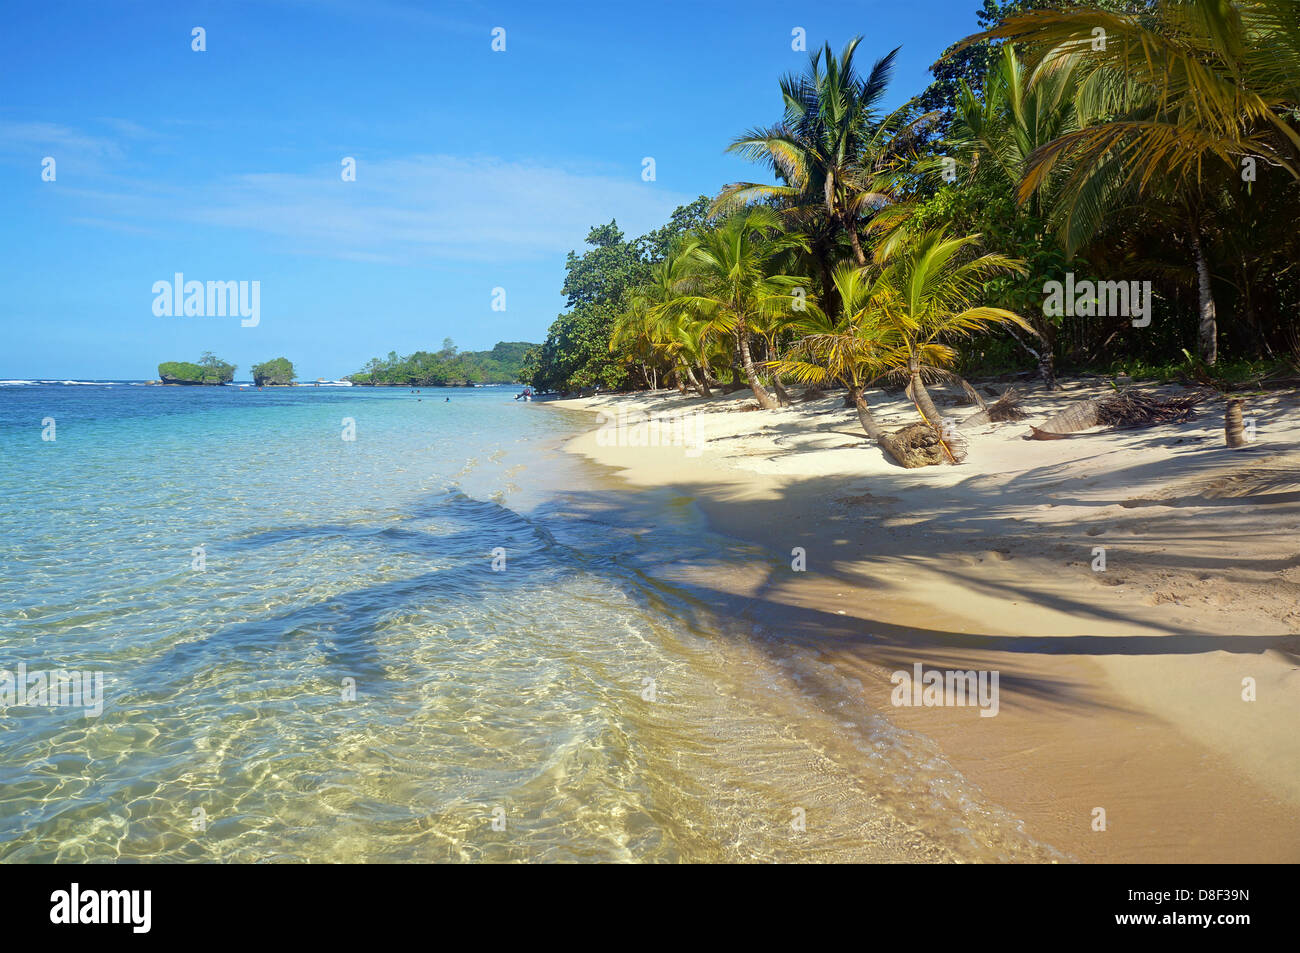 Pristine beach with shade of coconut trees on the sand and islands in background Stock Photo